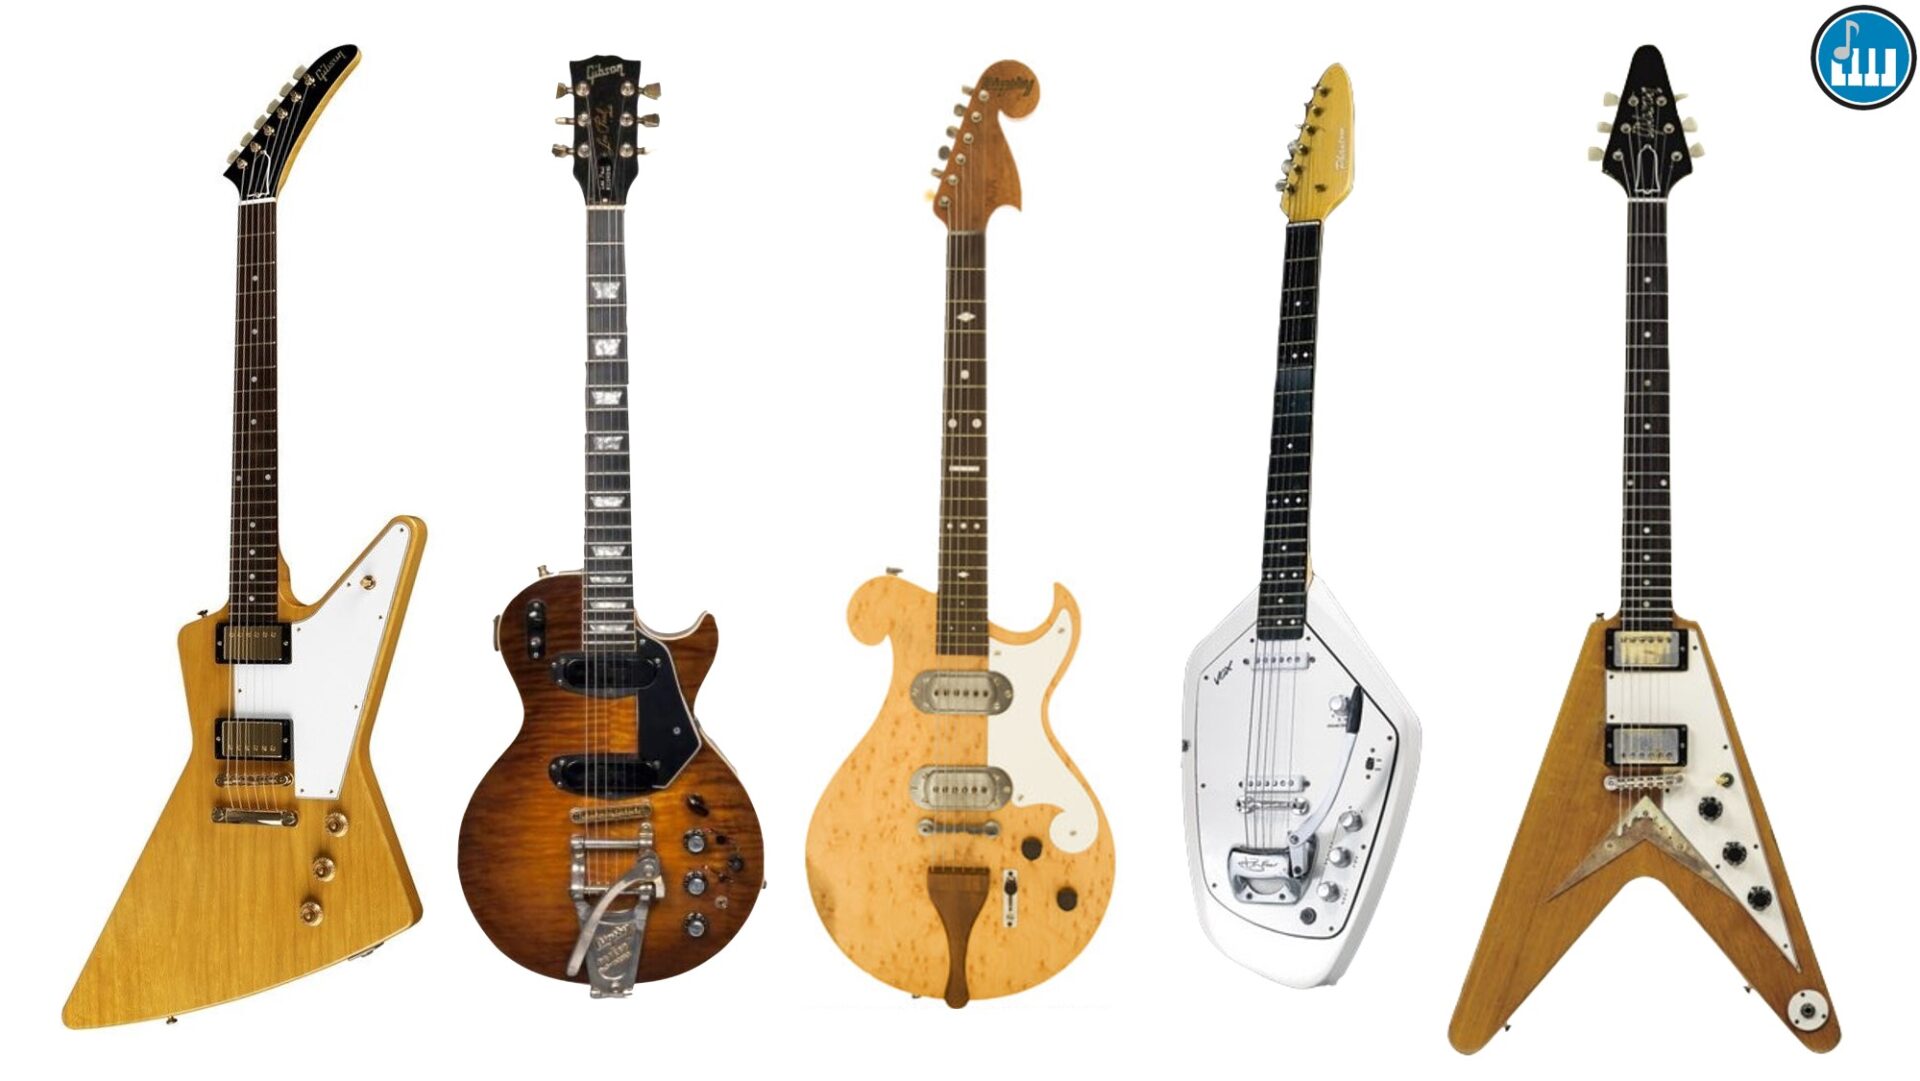 The rarest, most collectible and desired electric guitars in the world